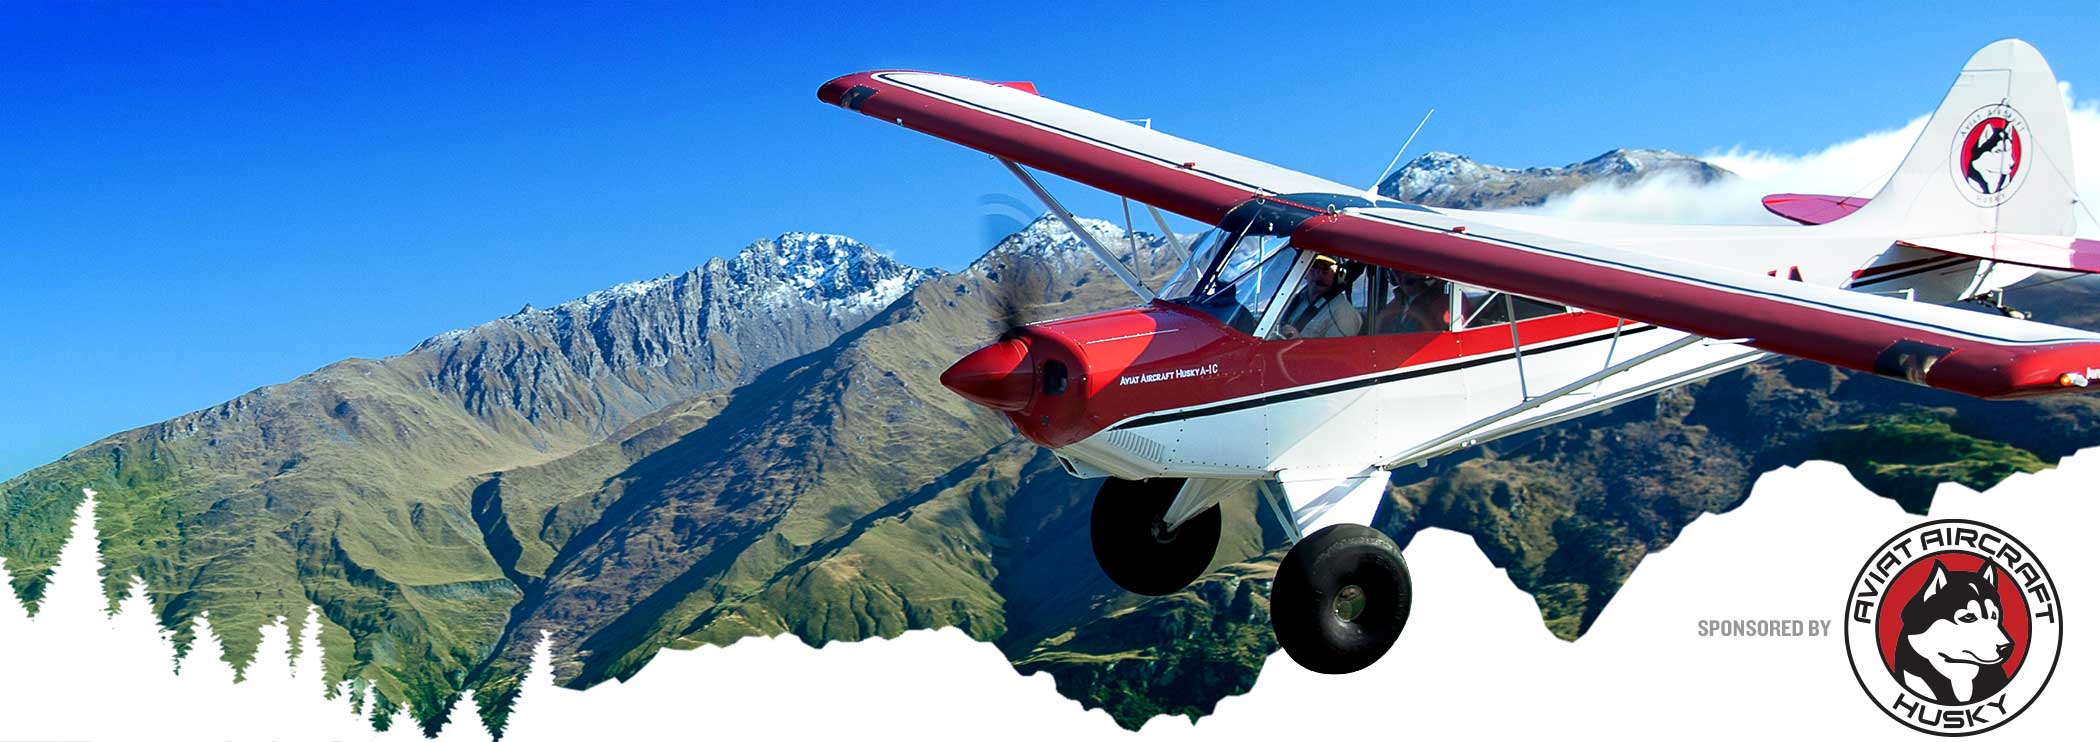 Air Safety Institute Backcountry Safety Center: Aviat Aircraft Husky Flying over a mountain